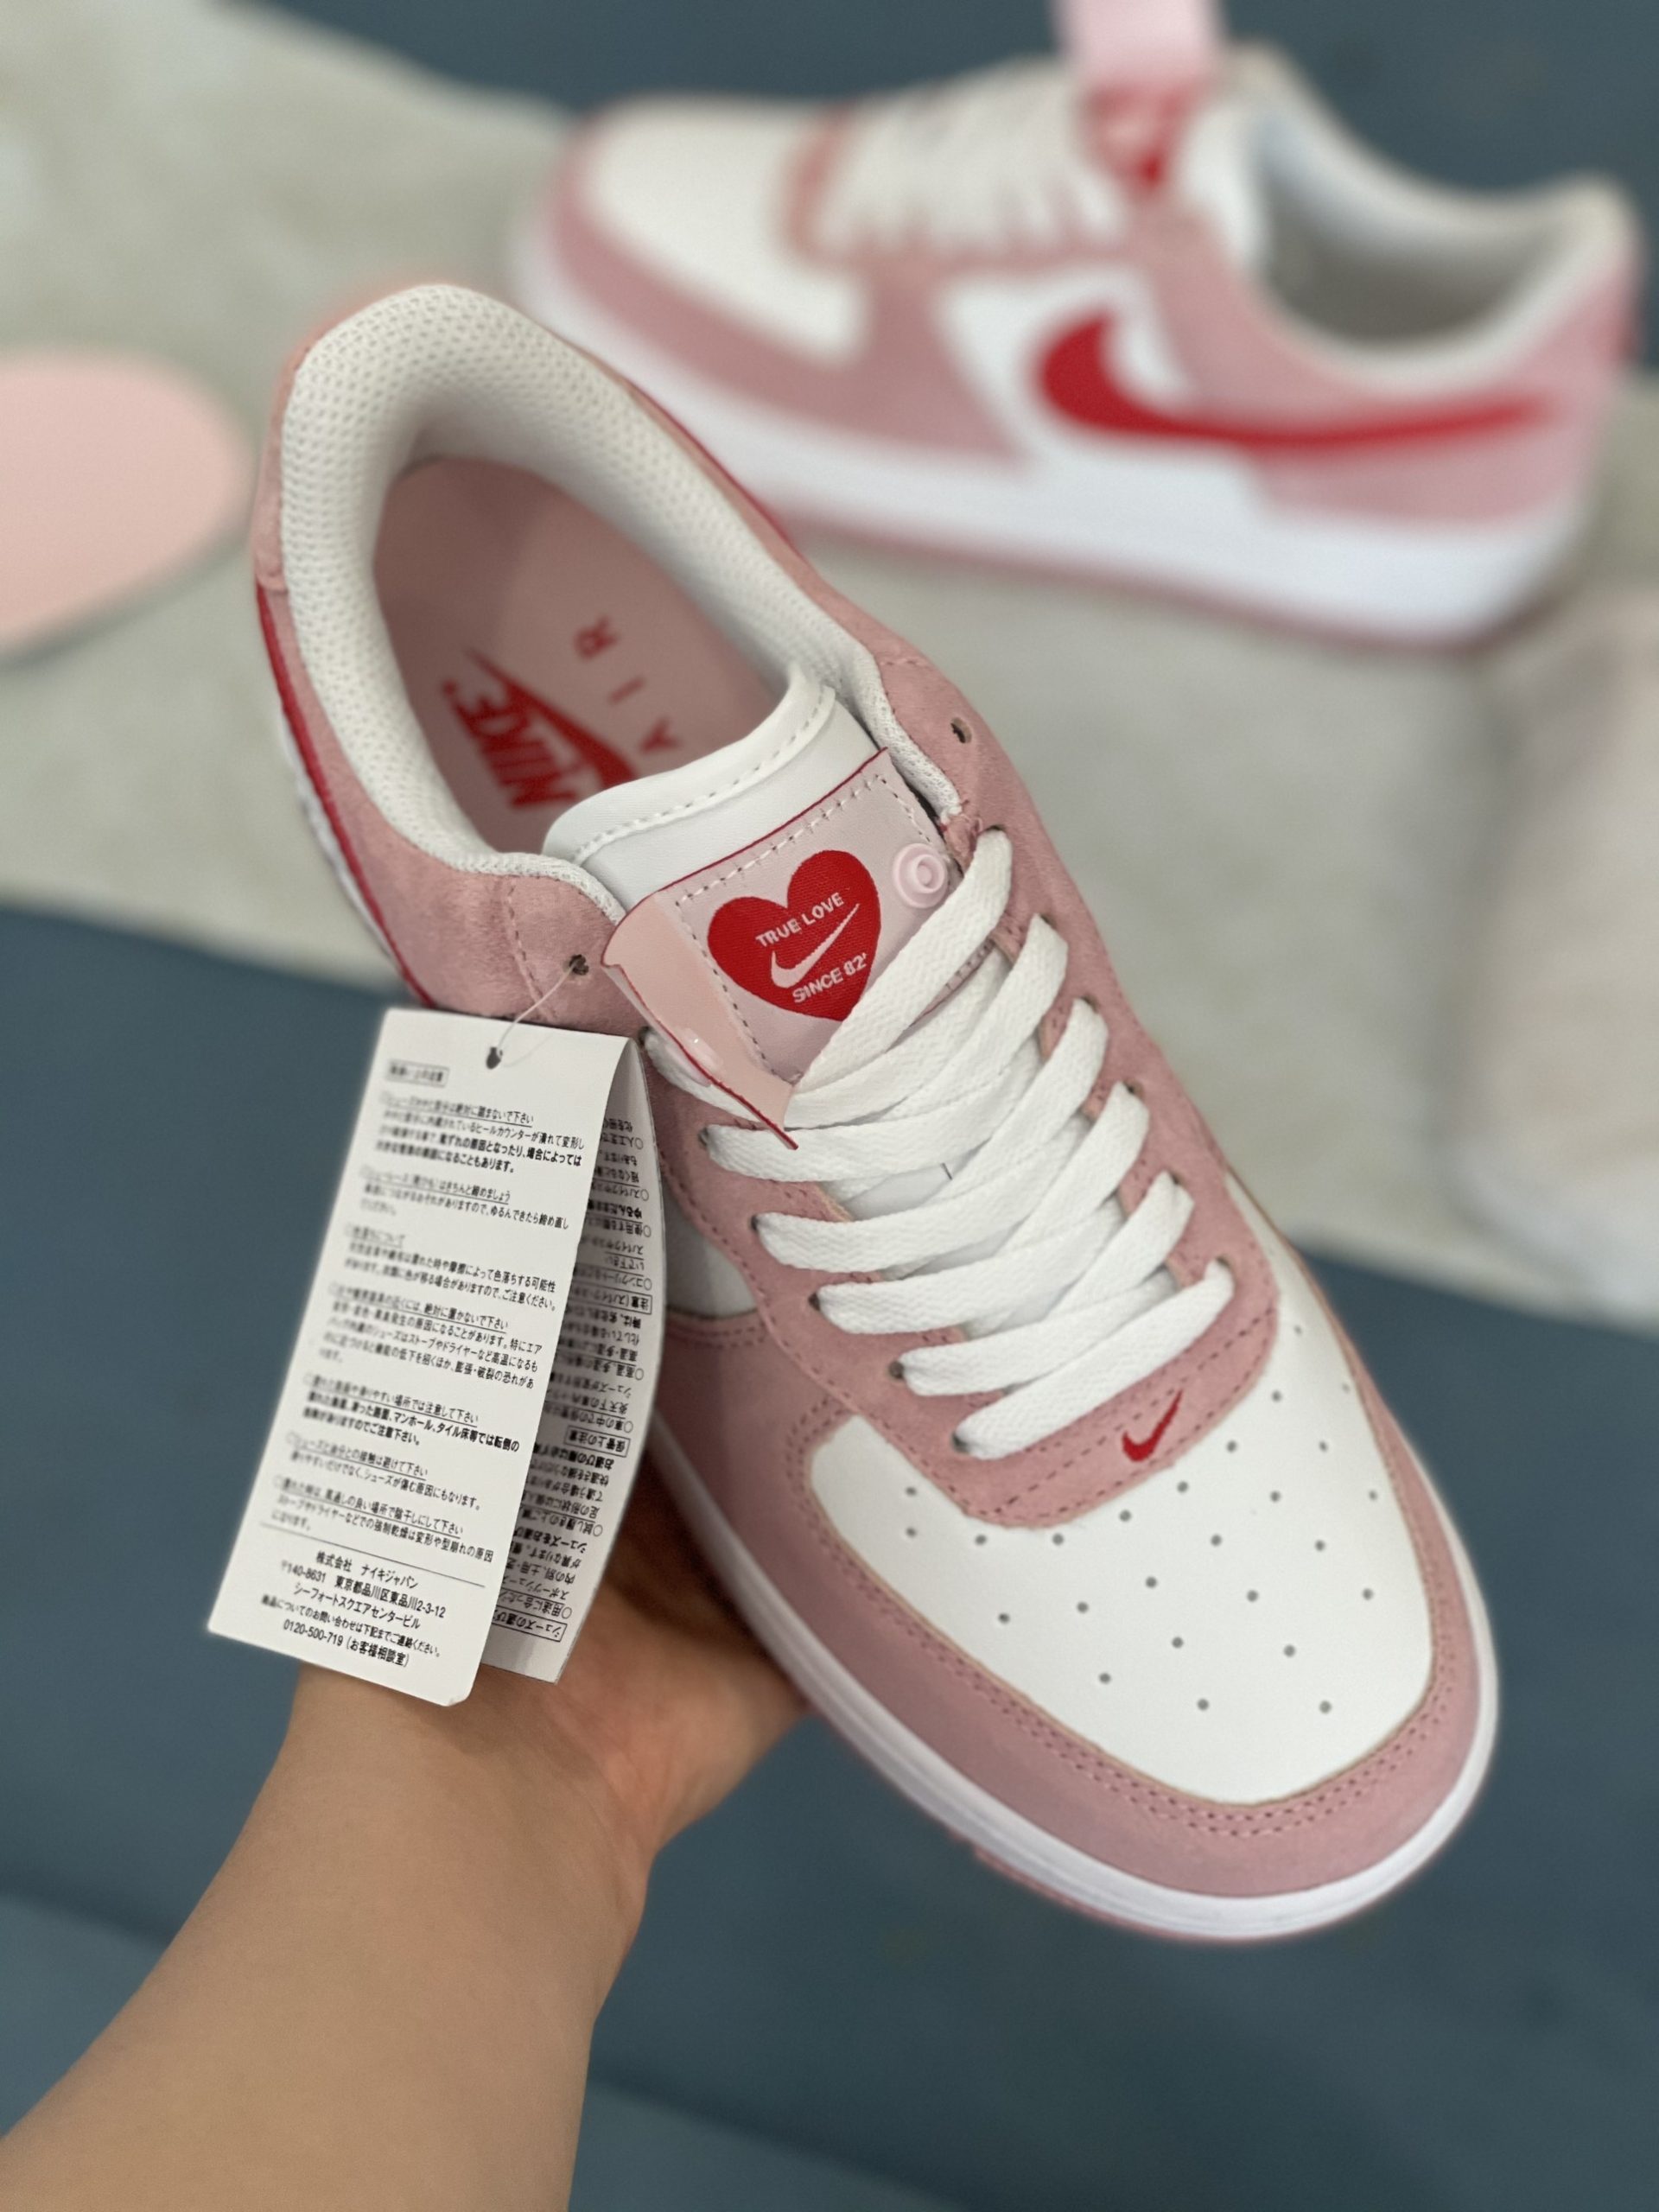 Nike Air Force 1 Valentine’s Day Love Letter Rep 1:1